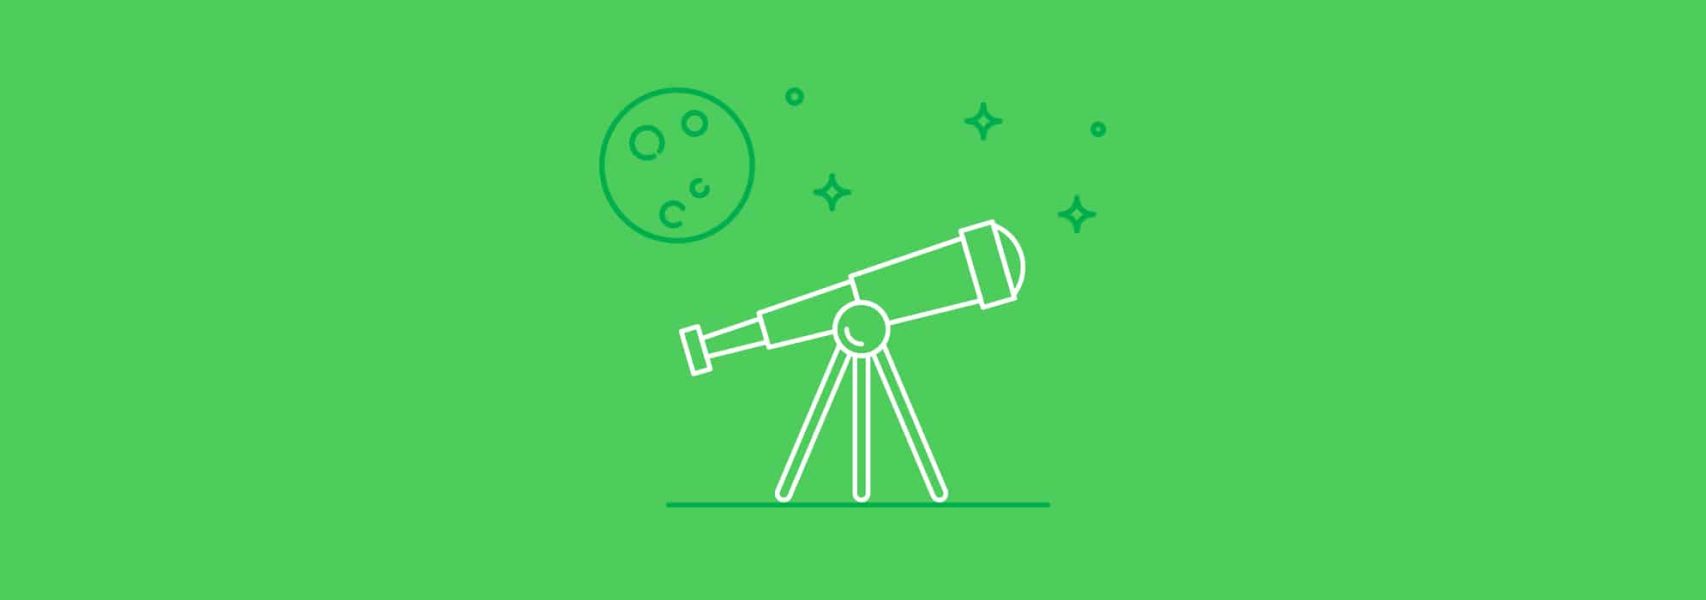 A minimalist green line drawing of a telescope on a green background.